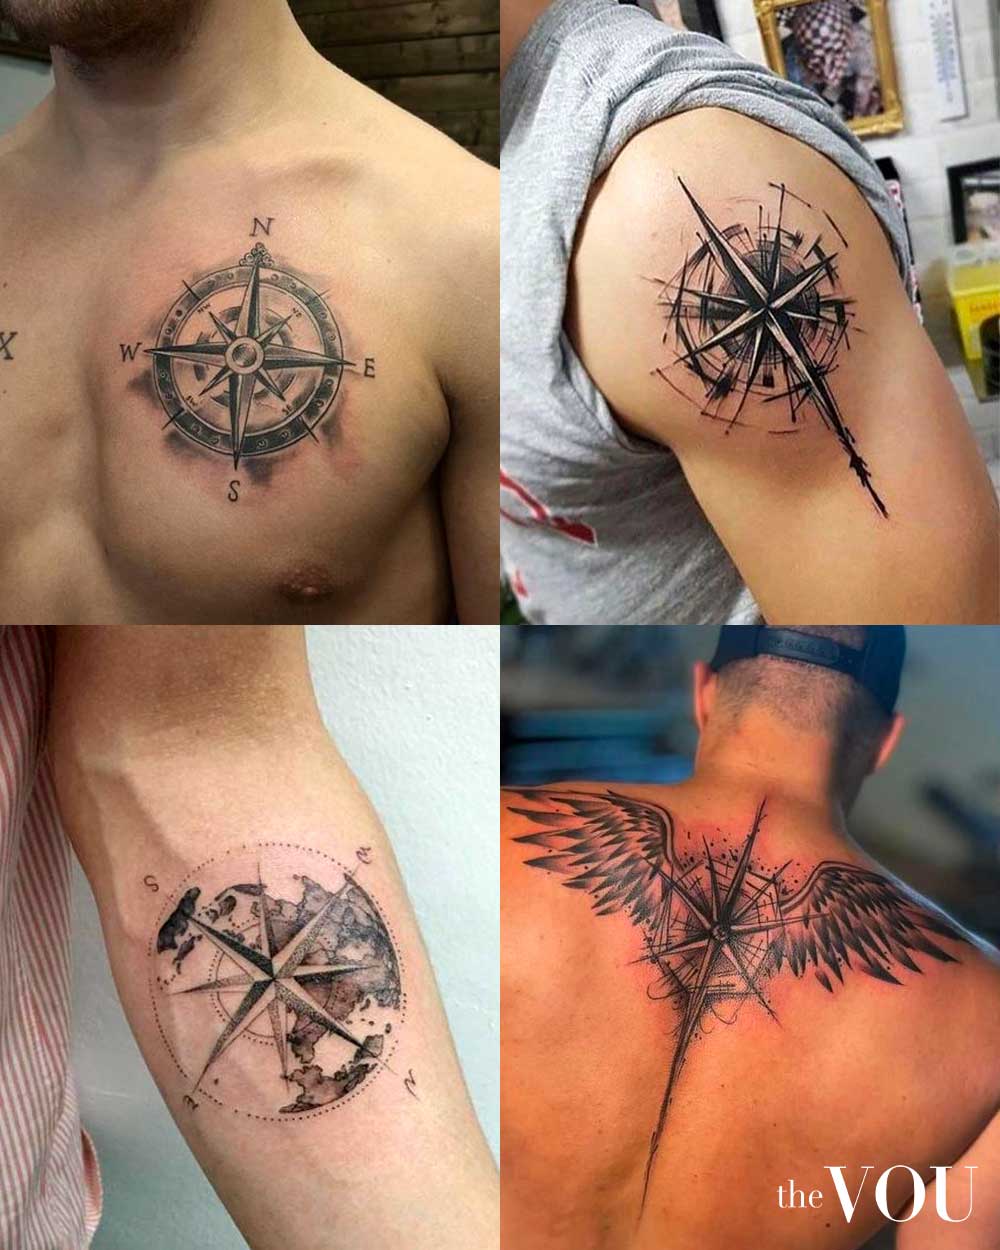 80 Compass Tattoos: Meaning, Design Ideas For Men & Women - DMARGE